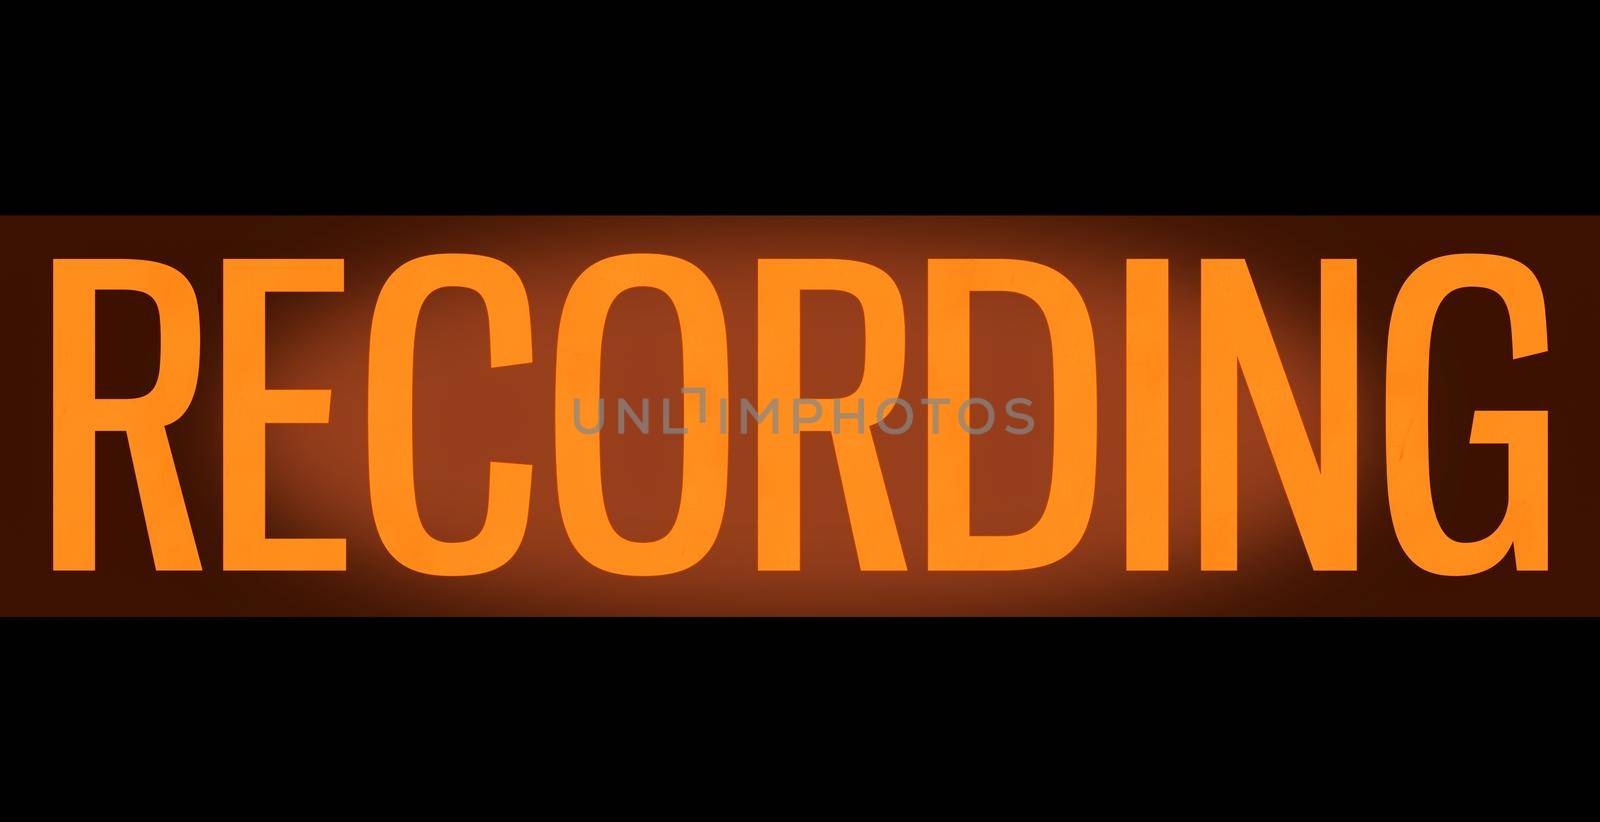 A Retro, Orange Glowing Recording Sign In A Music Studio Or Radio Or TV Station